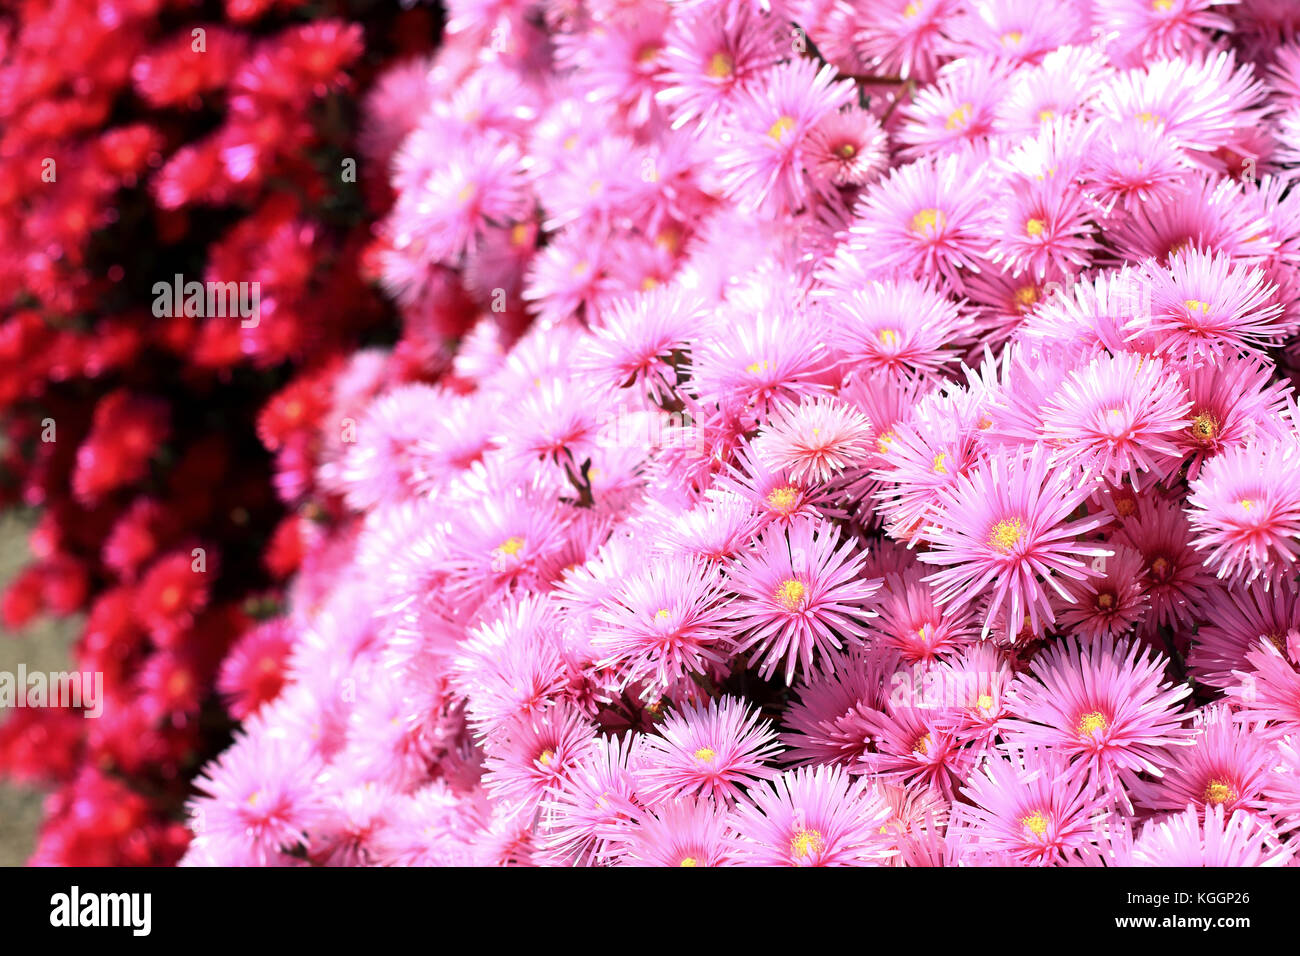 Pink and red Pig face flowers or Mesembryanthemum, ice plant flowers, Livingstone Daisies in full bloom Stock Photo